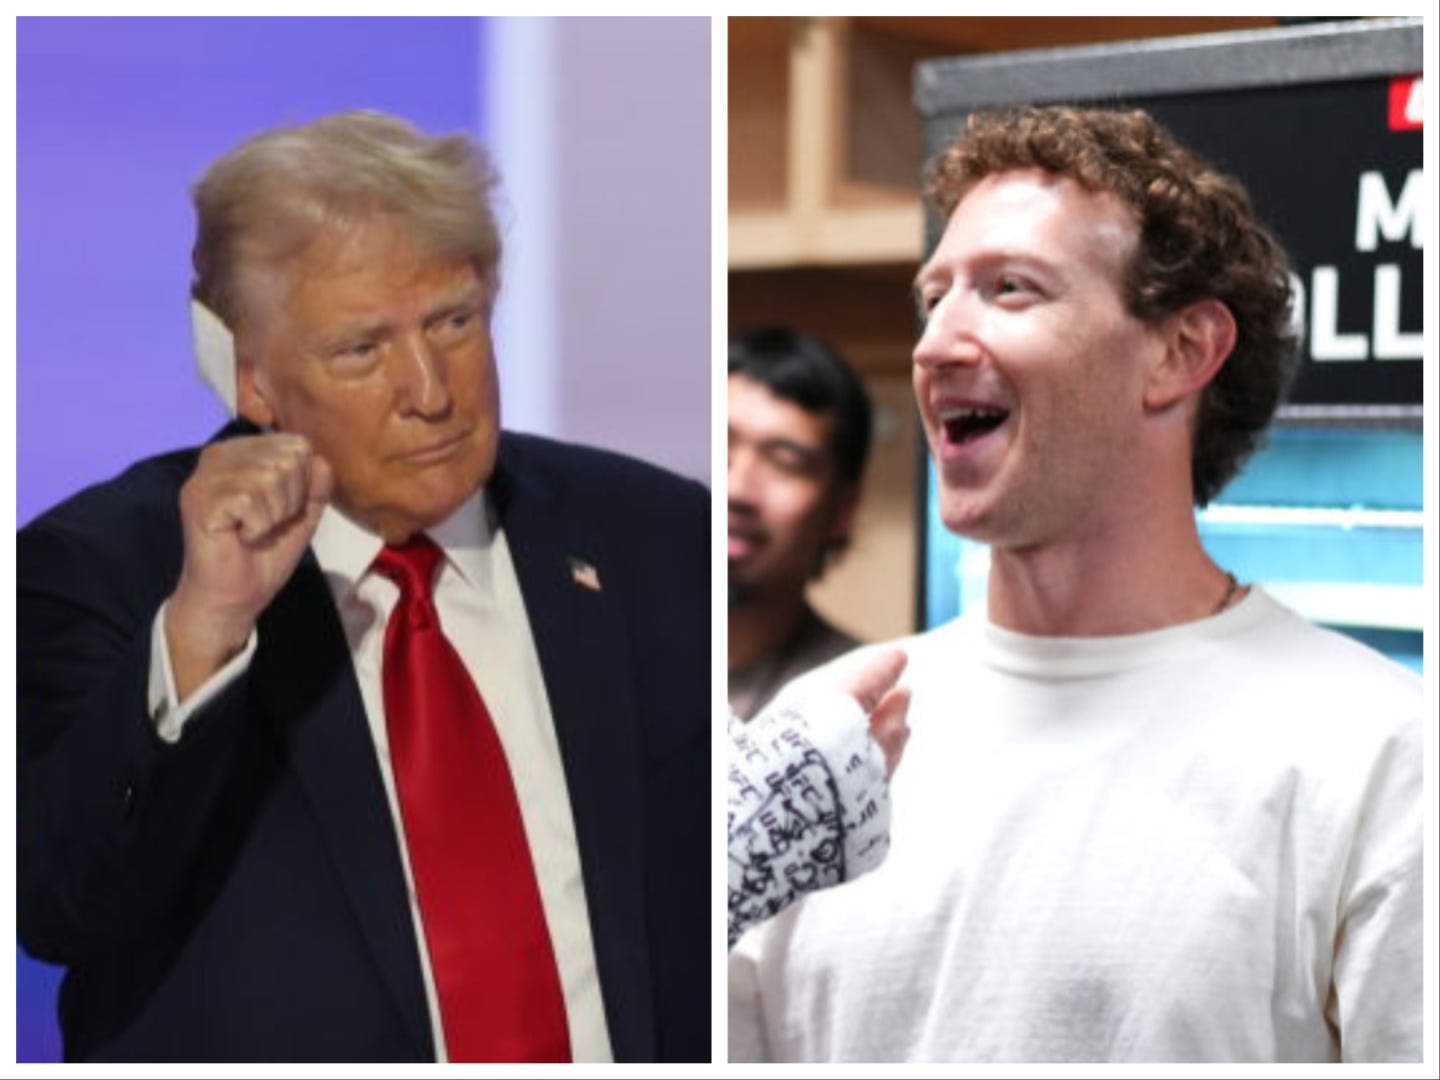 Trump says Zuckerberg called him after assassination attempt and told him he wouldn't endorse a Democrat